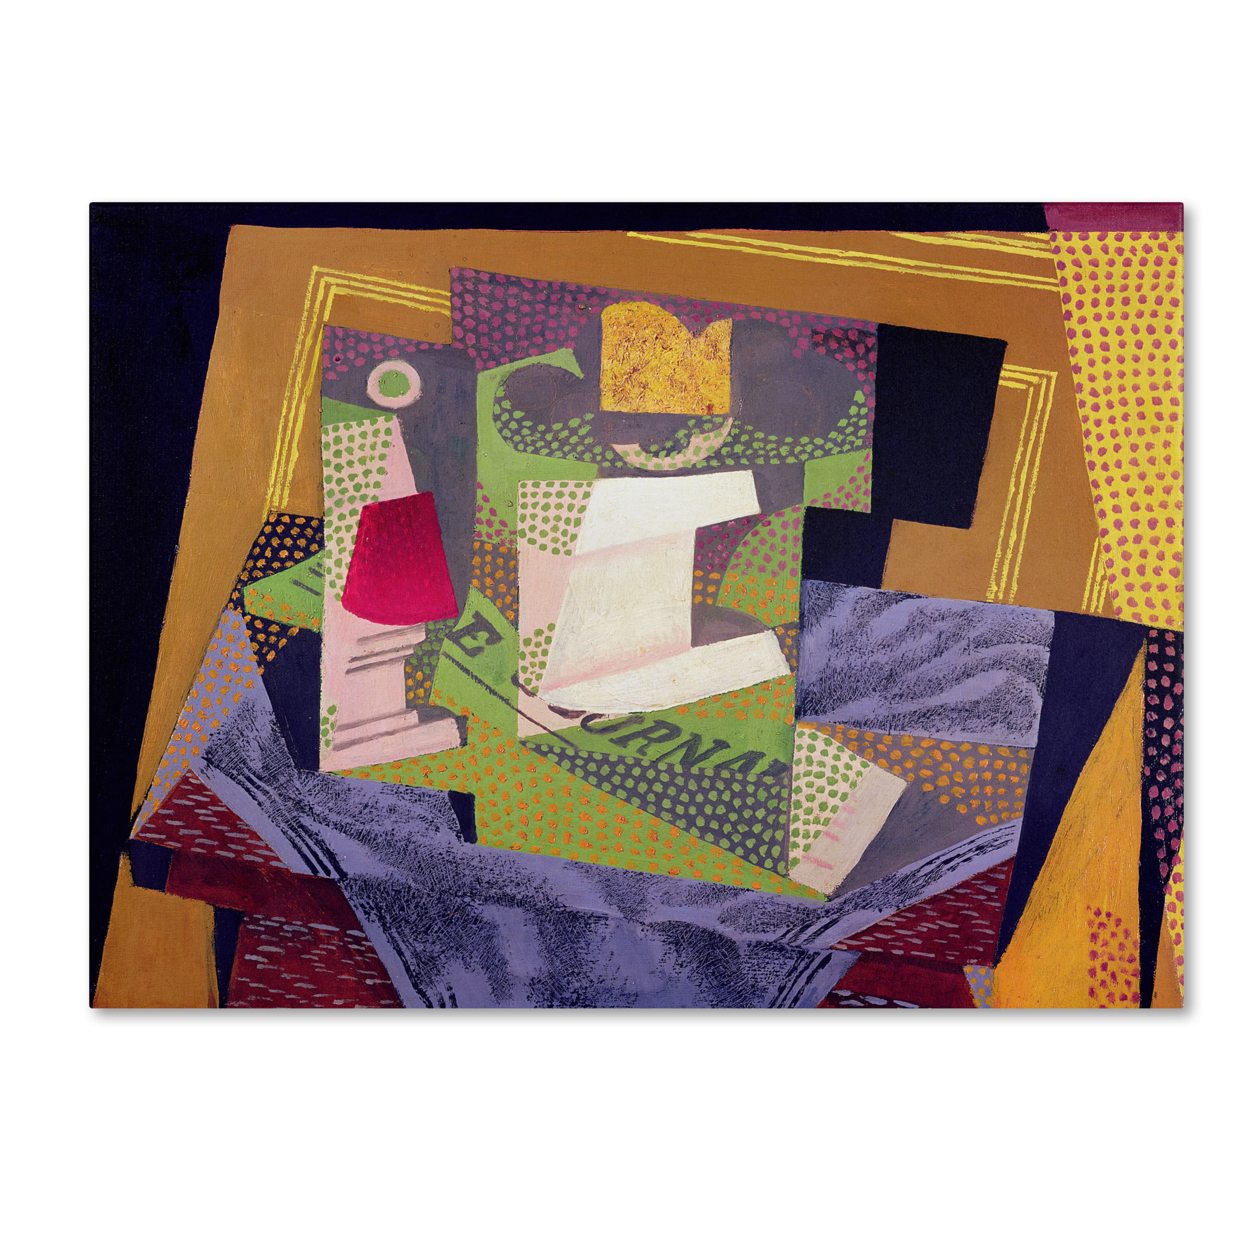 Juan Gris 'Composition On A Table 1916' Canvas Wall Art 35 X 47 Inches